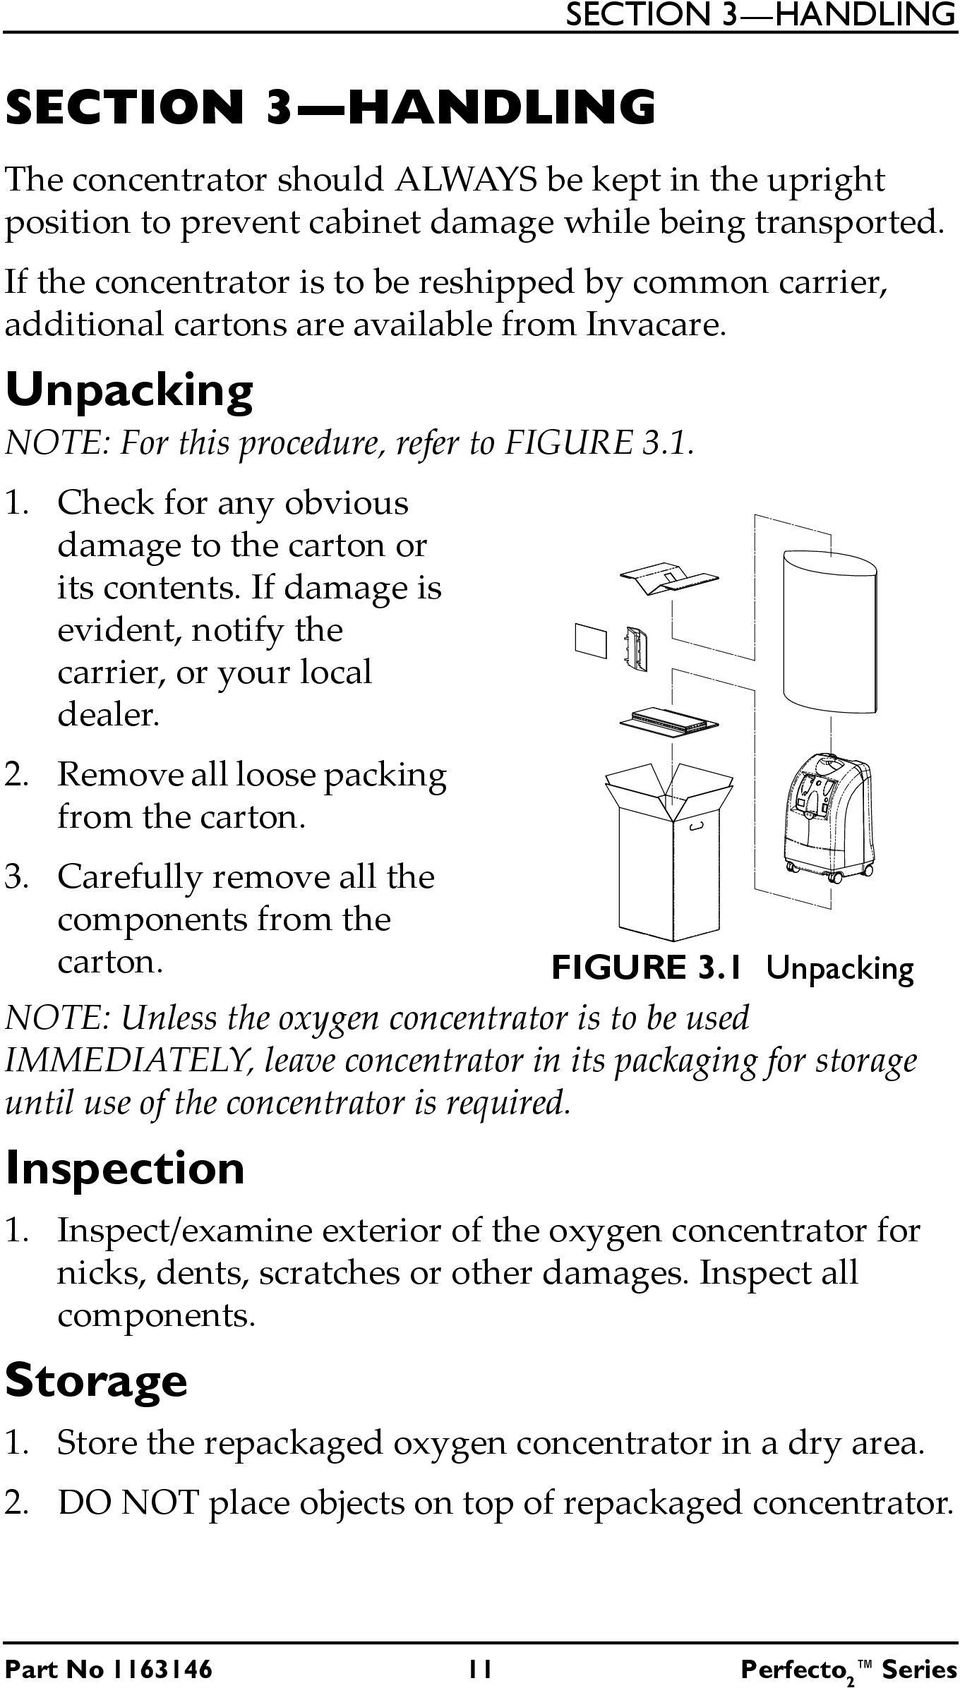 Check for any obvious damage to the carton or its contents. If damage is evident, notify the carrier, or your local dealer. 2. Remove all loose packing from the carton. 3.